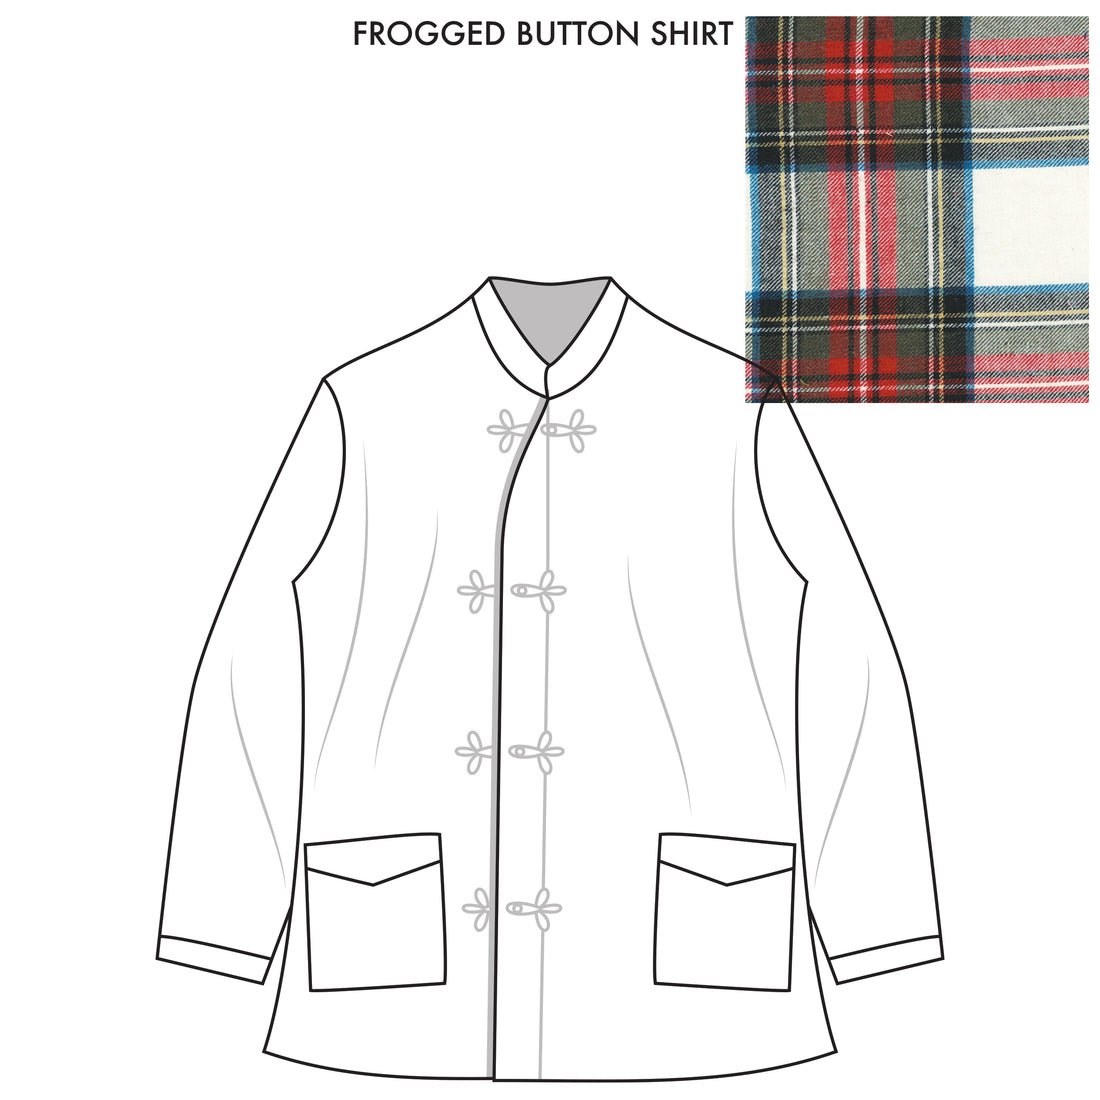 Bryceland’s Frogged Button Shirt Made-to-order Multi Plaid